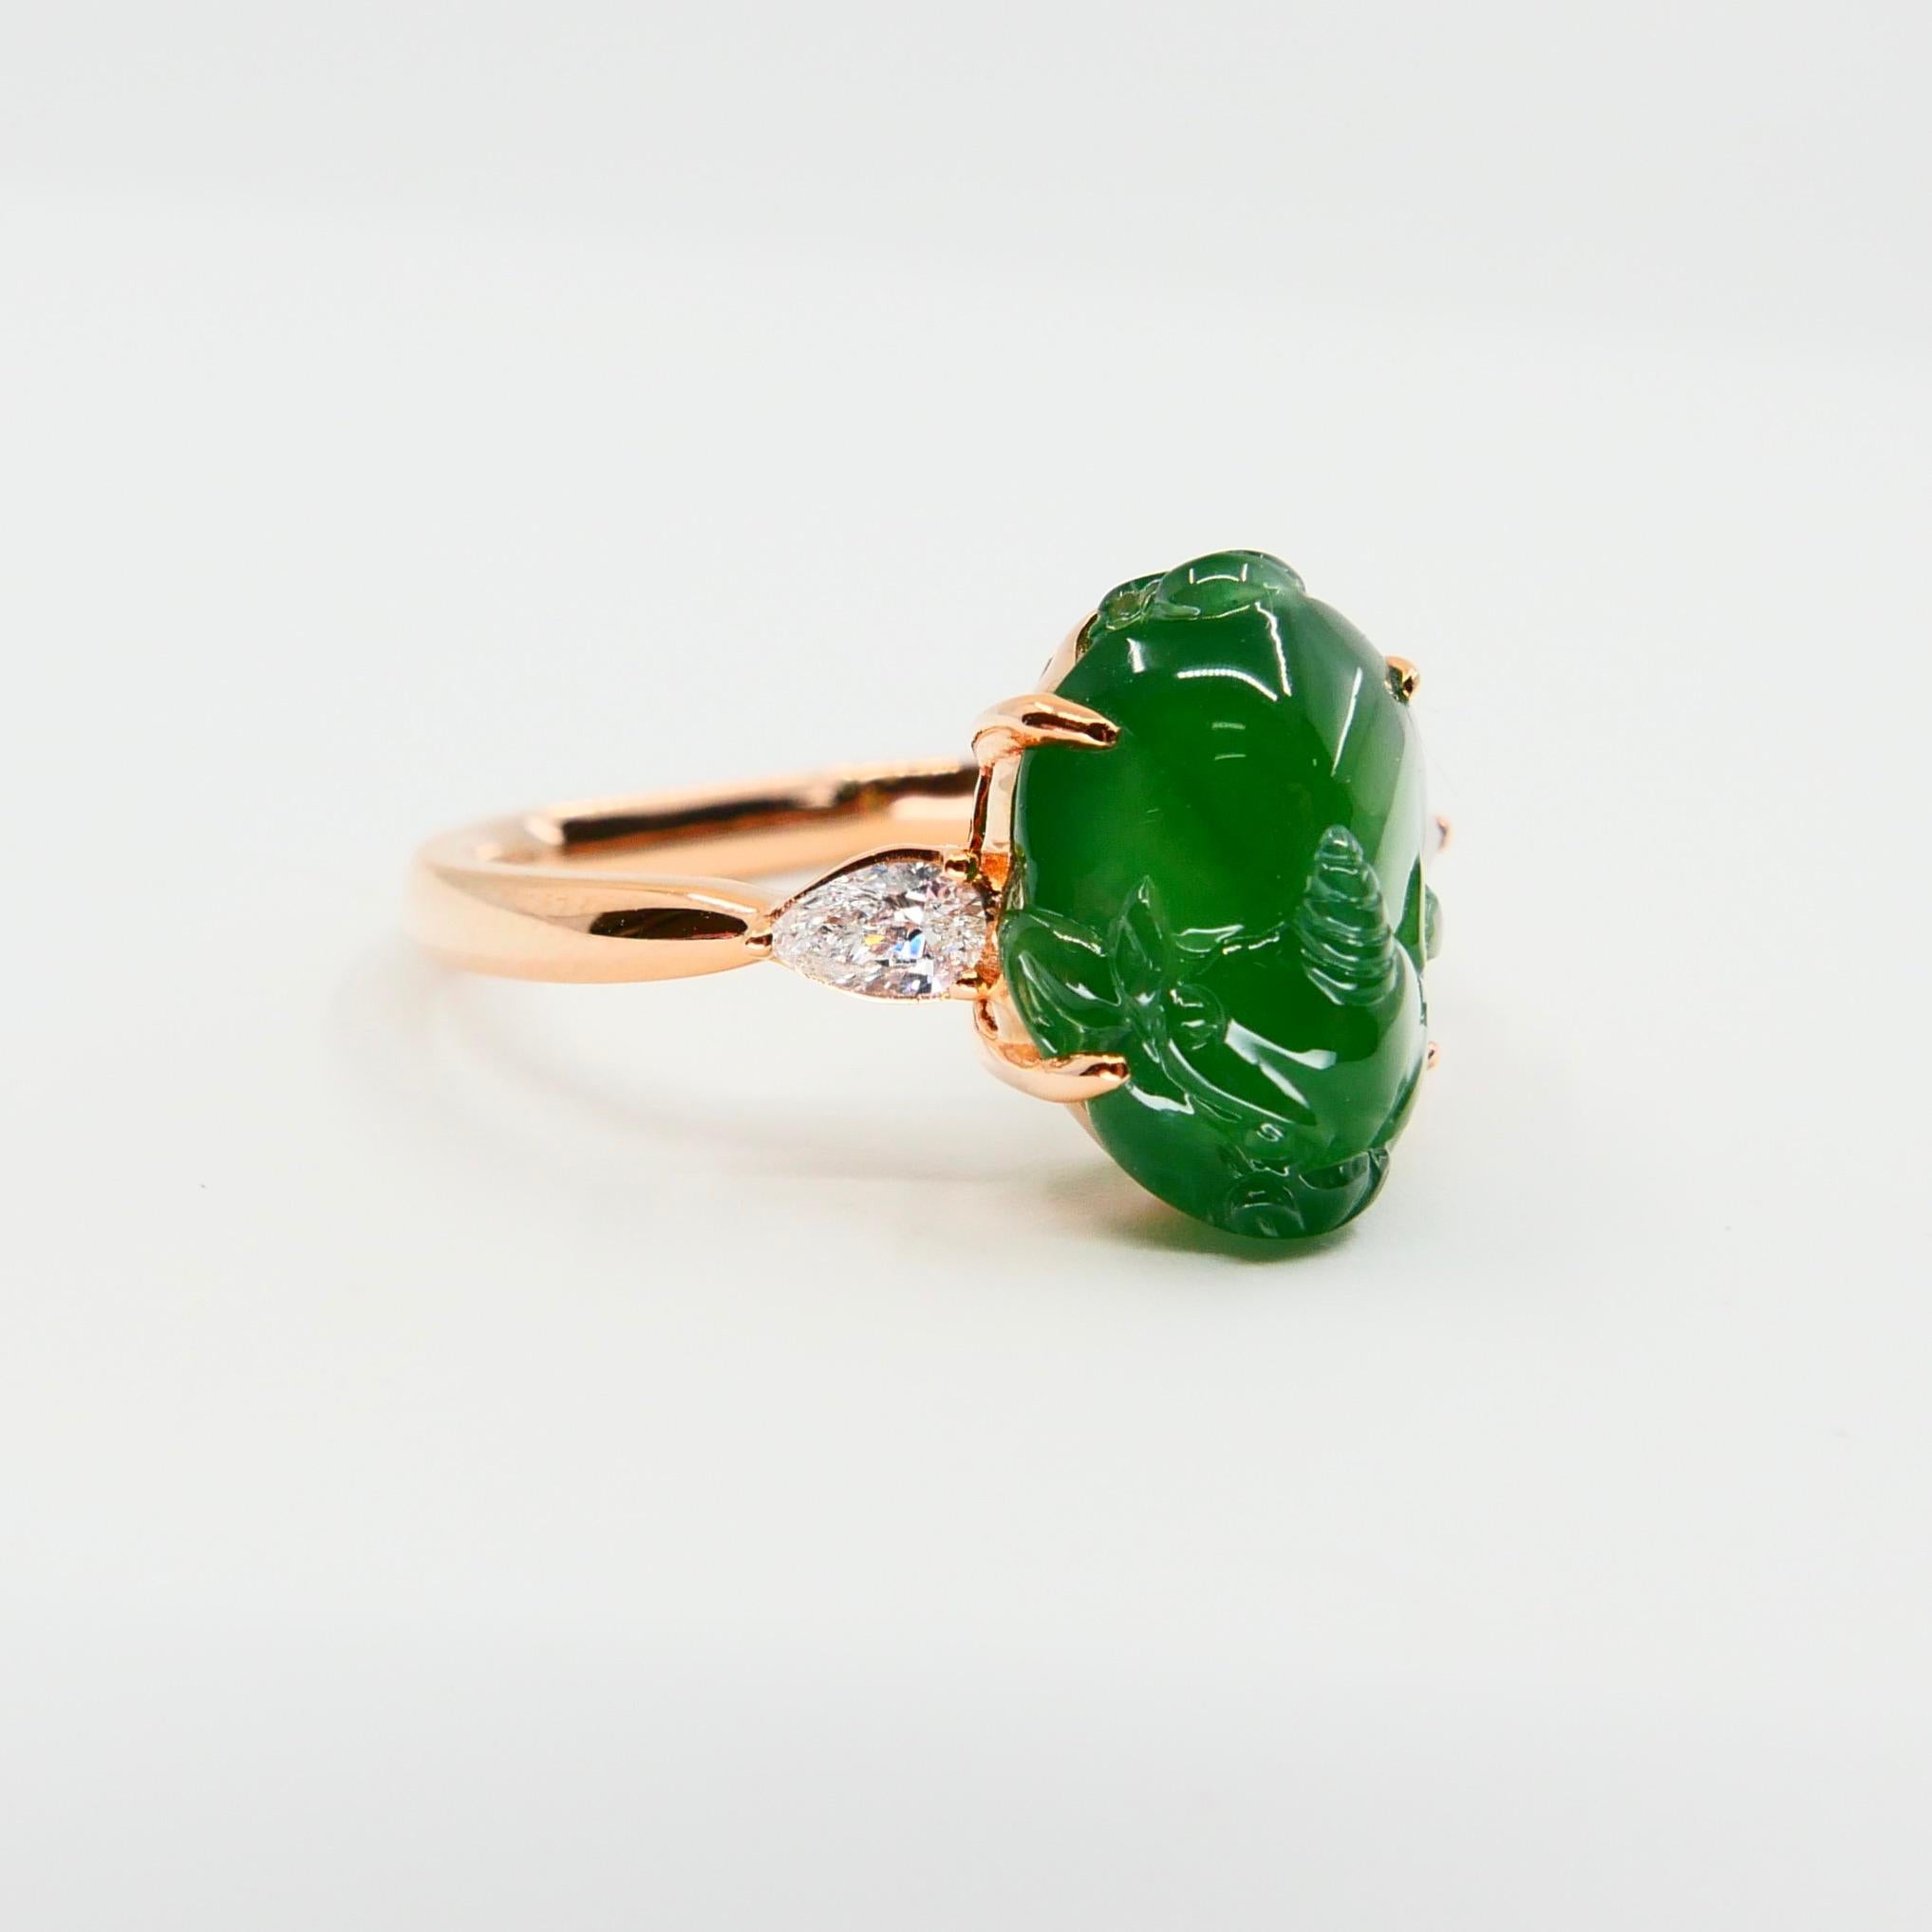 Certified 5.29 Carat Type A Jade and Diamond Cocktail Ring, Best Imperial Green 4